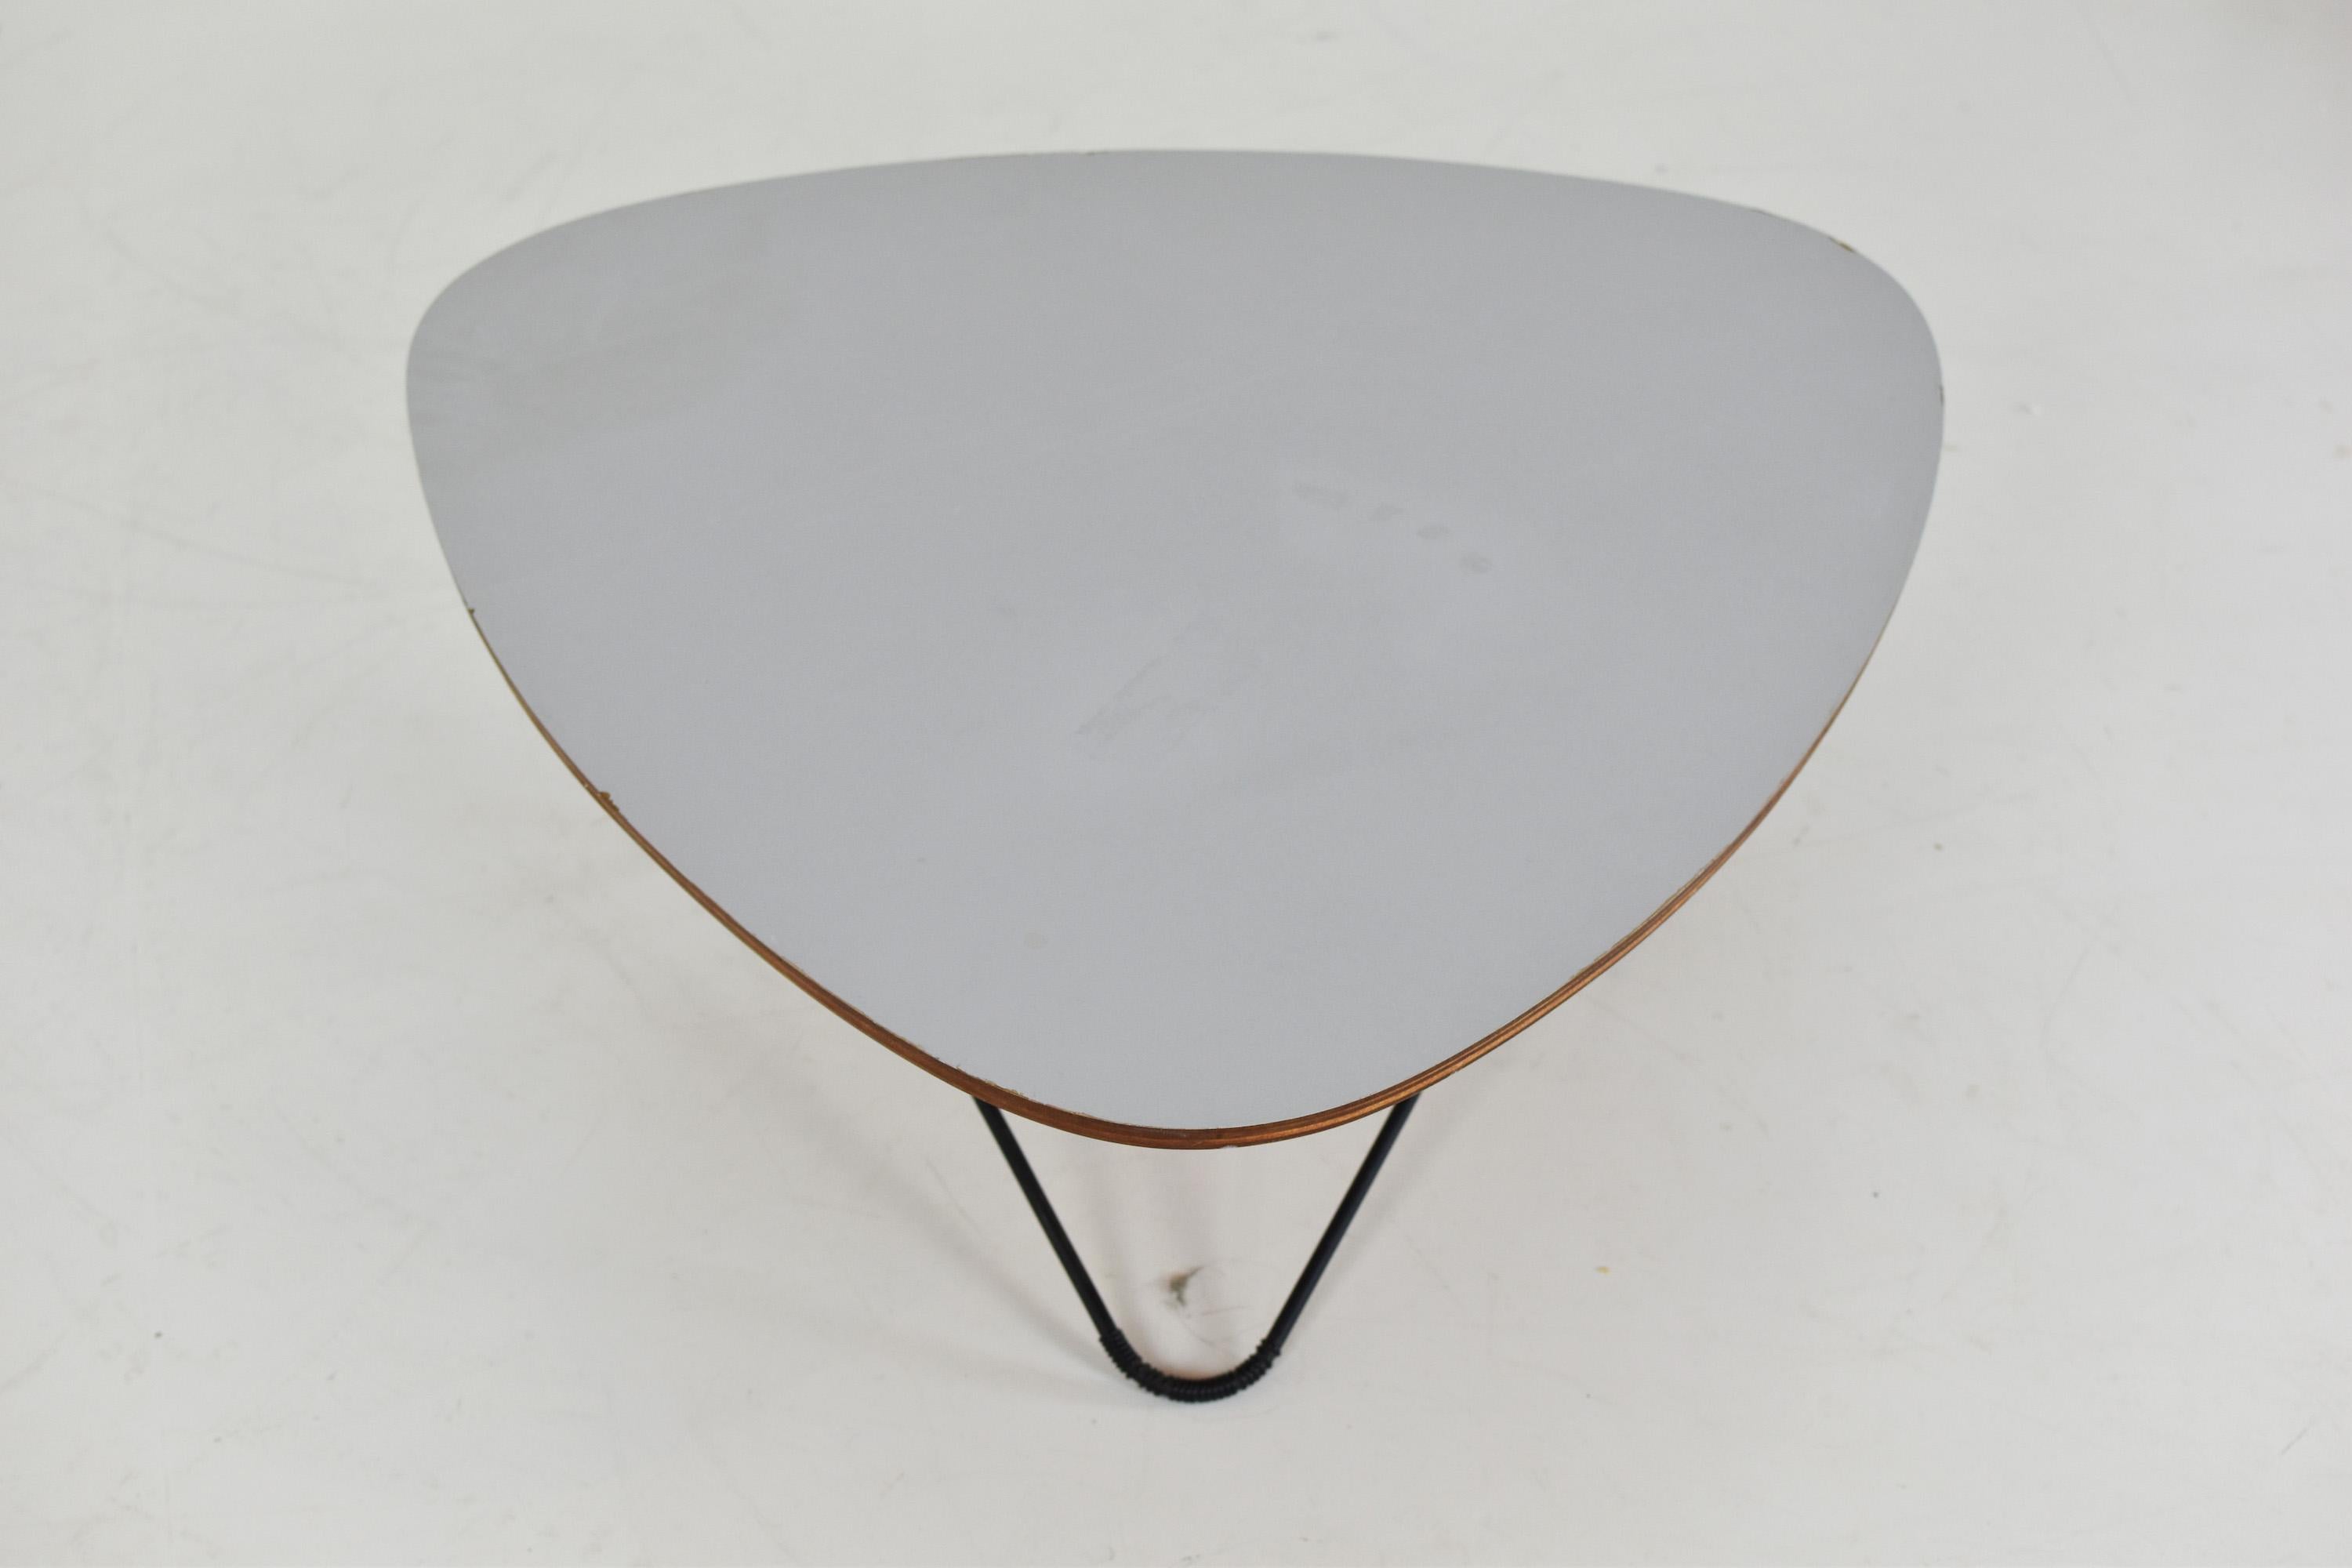 French Diamond Shaped Coffee Table by Florent Lasbleiz for Airborne, France 1954